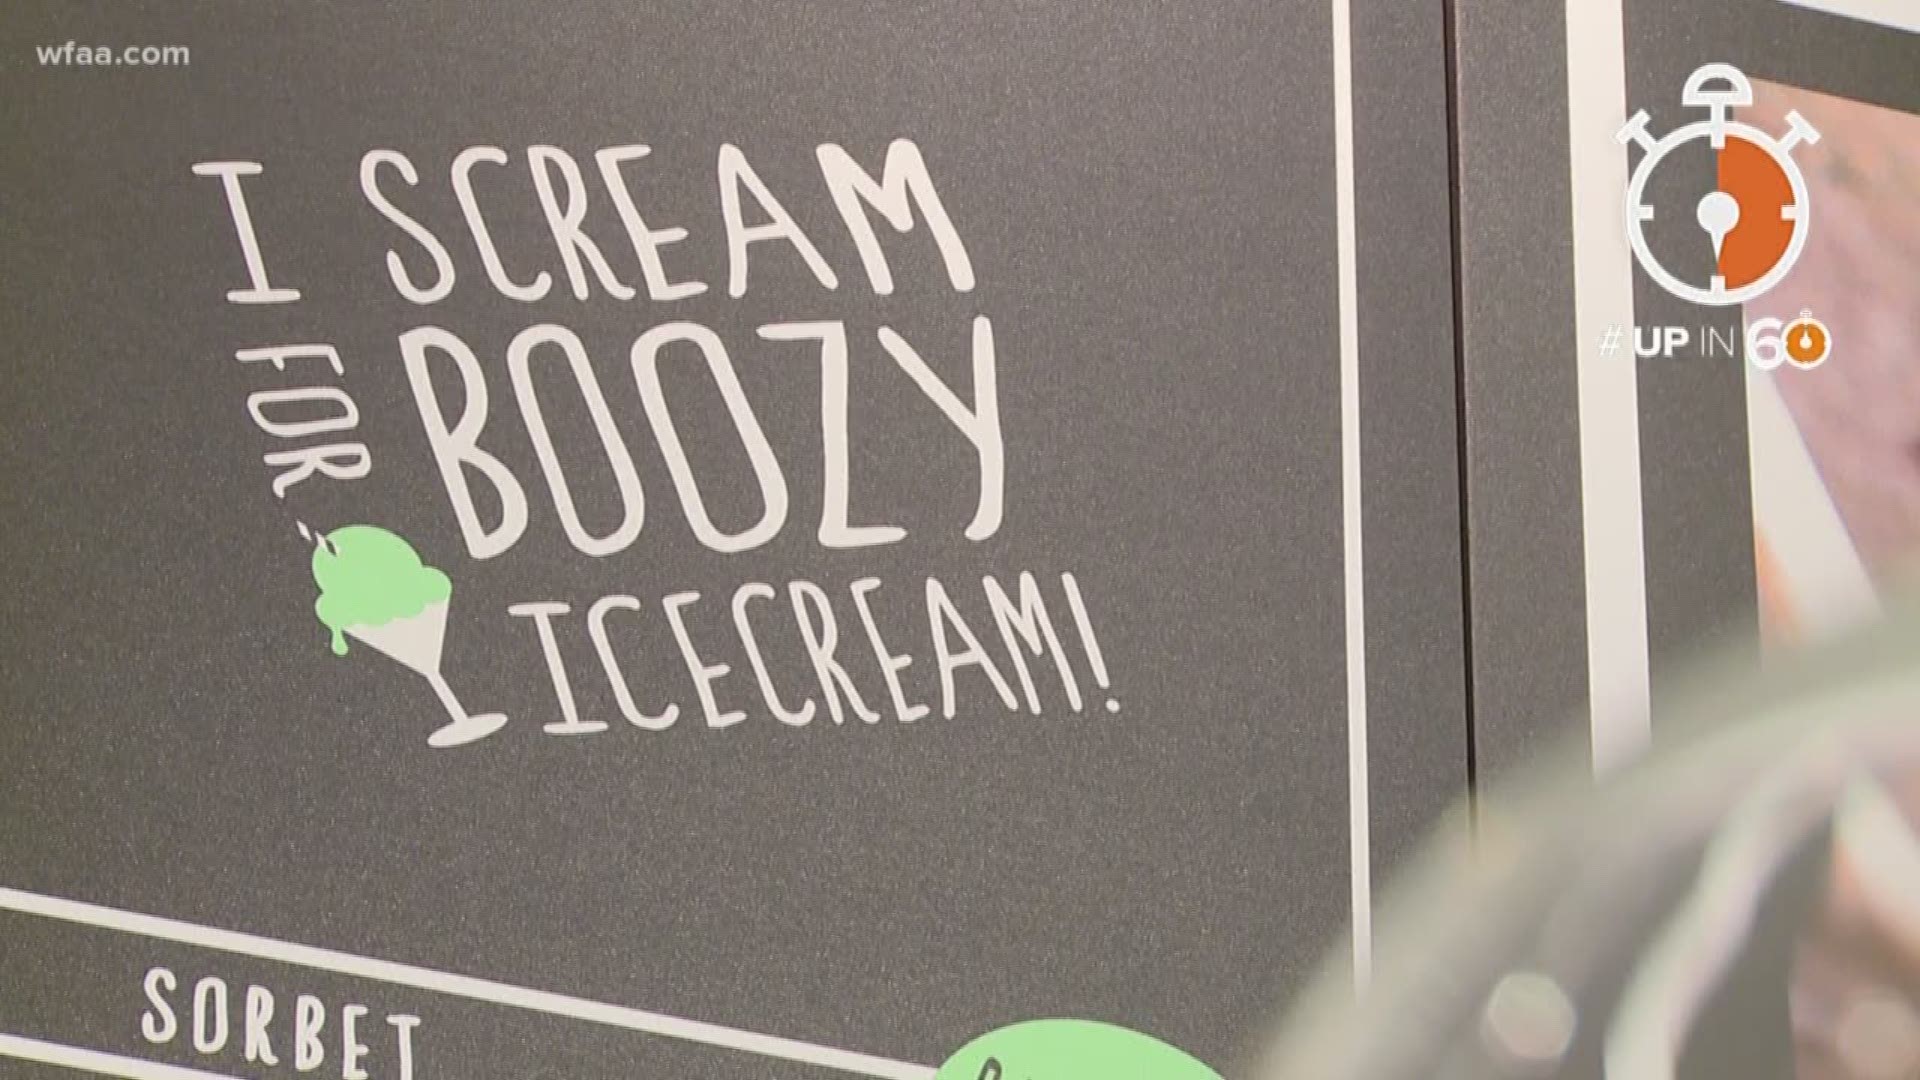 Dessert for the grown-ups: Spiked ice cream makes its way to Dallas